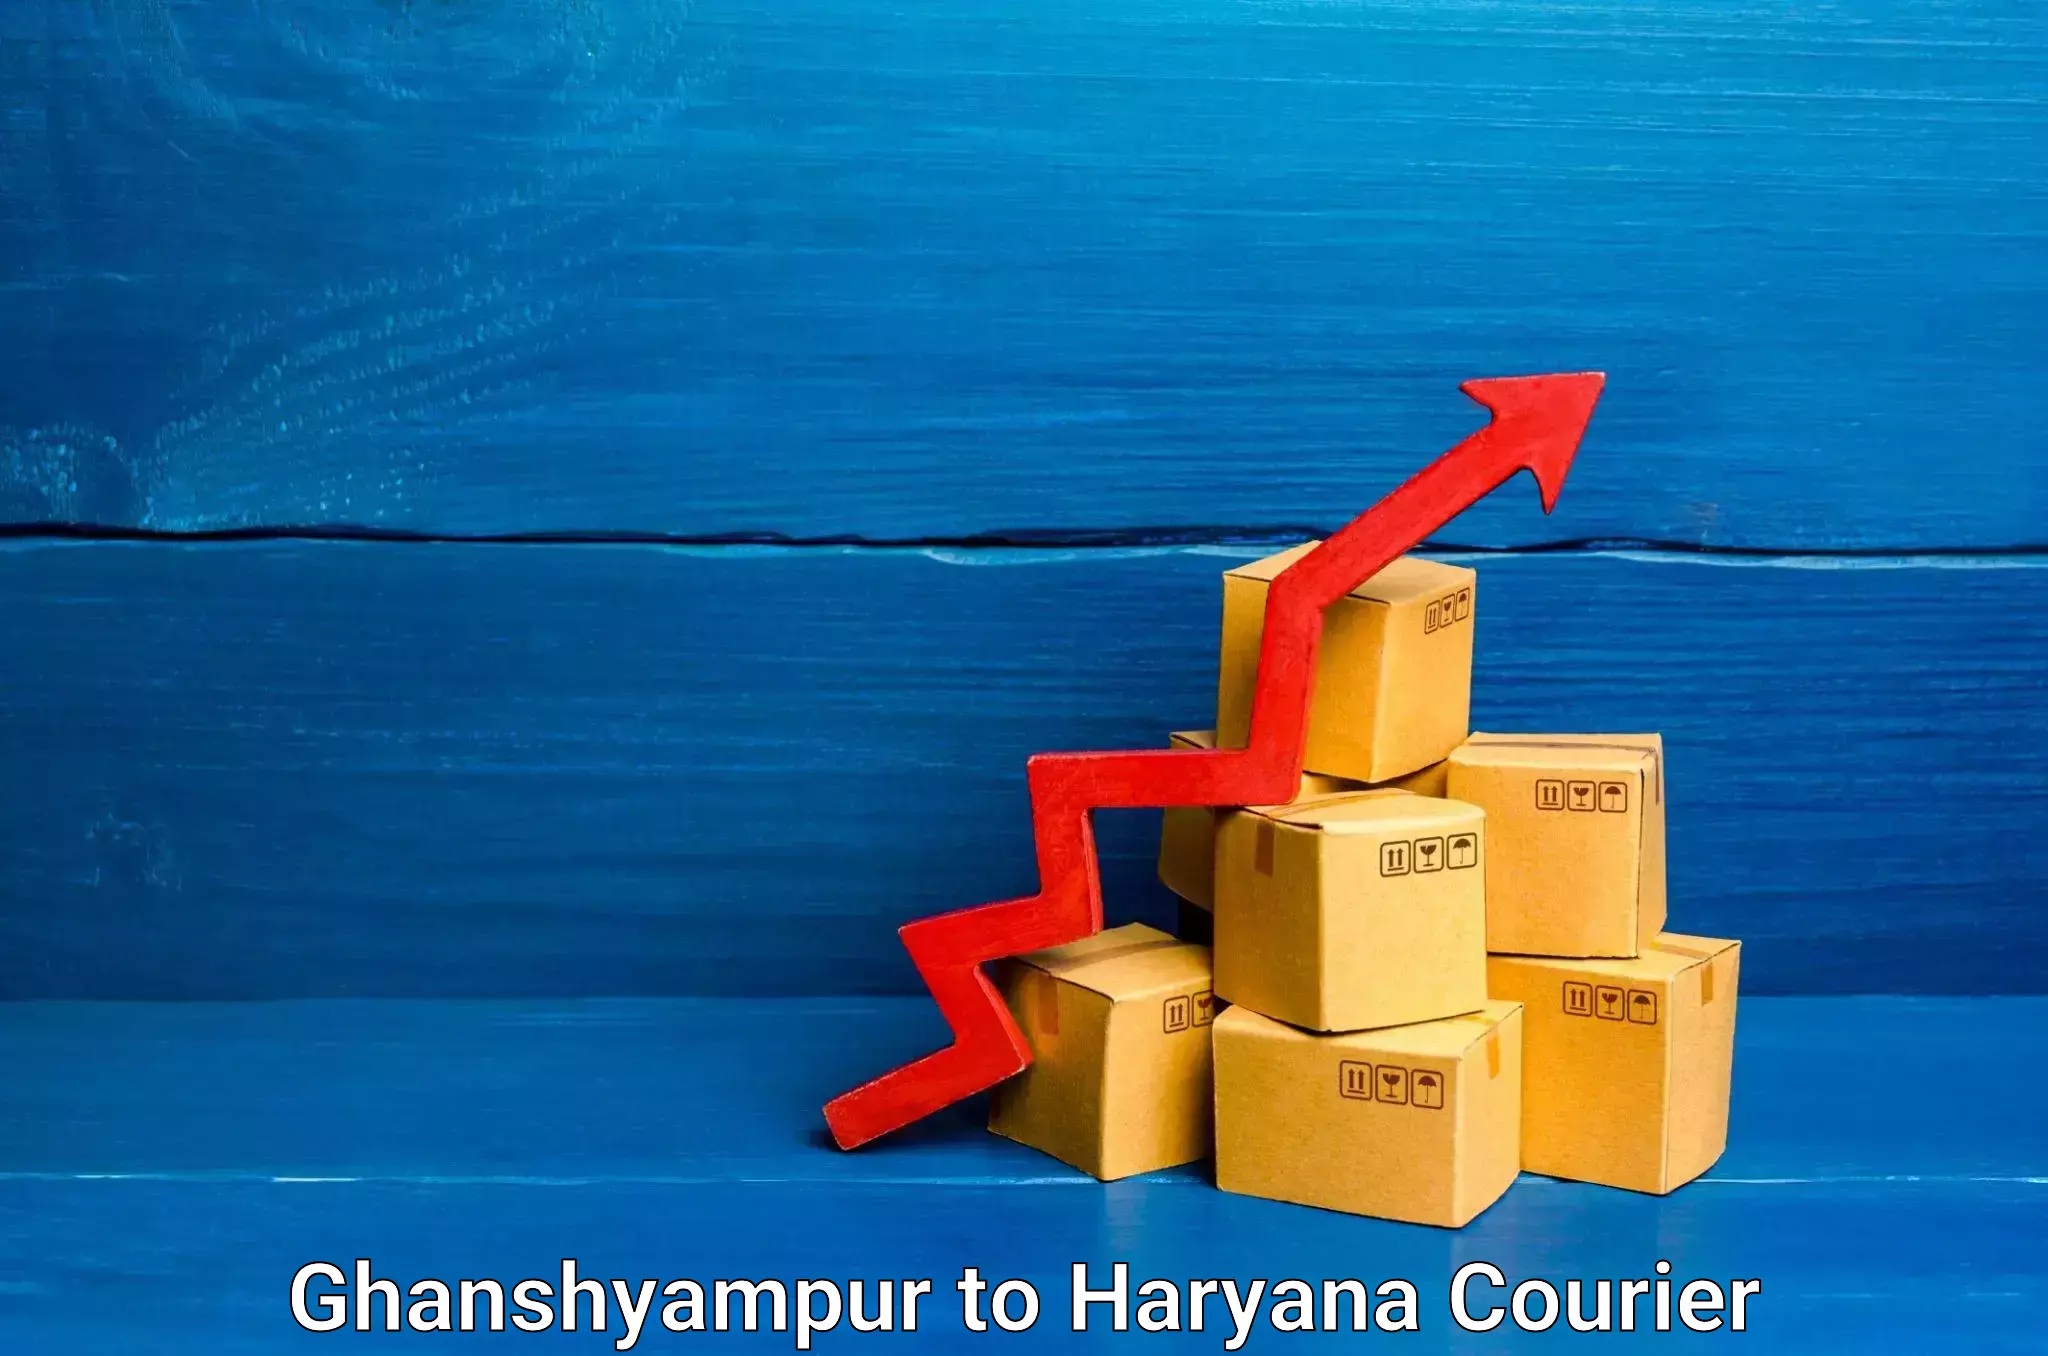 Furniture moving specialists Ghanshyampur to Haryana